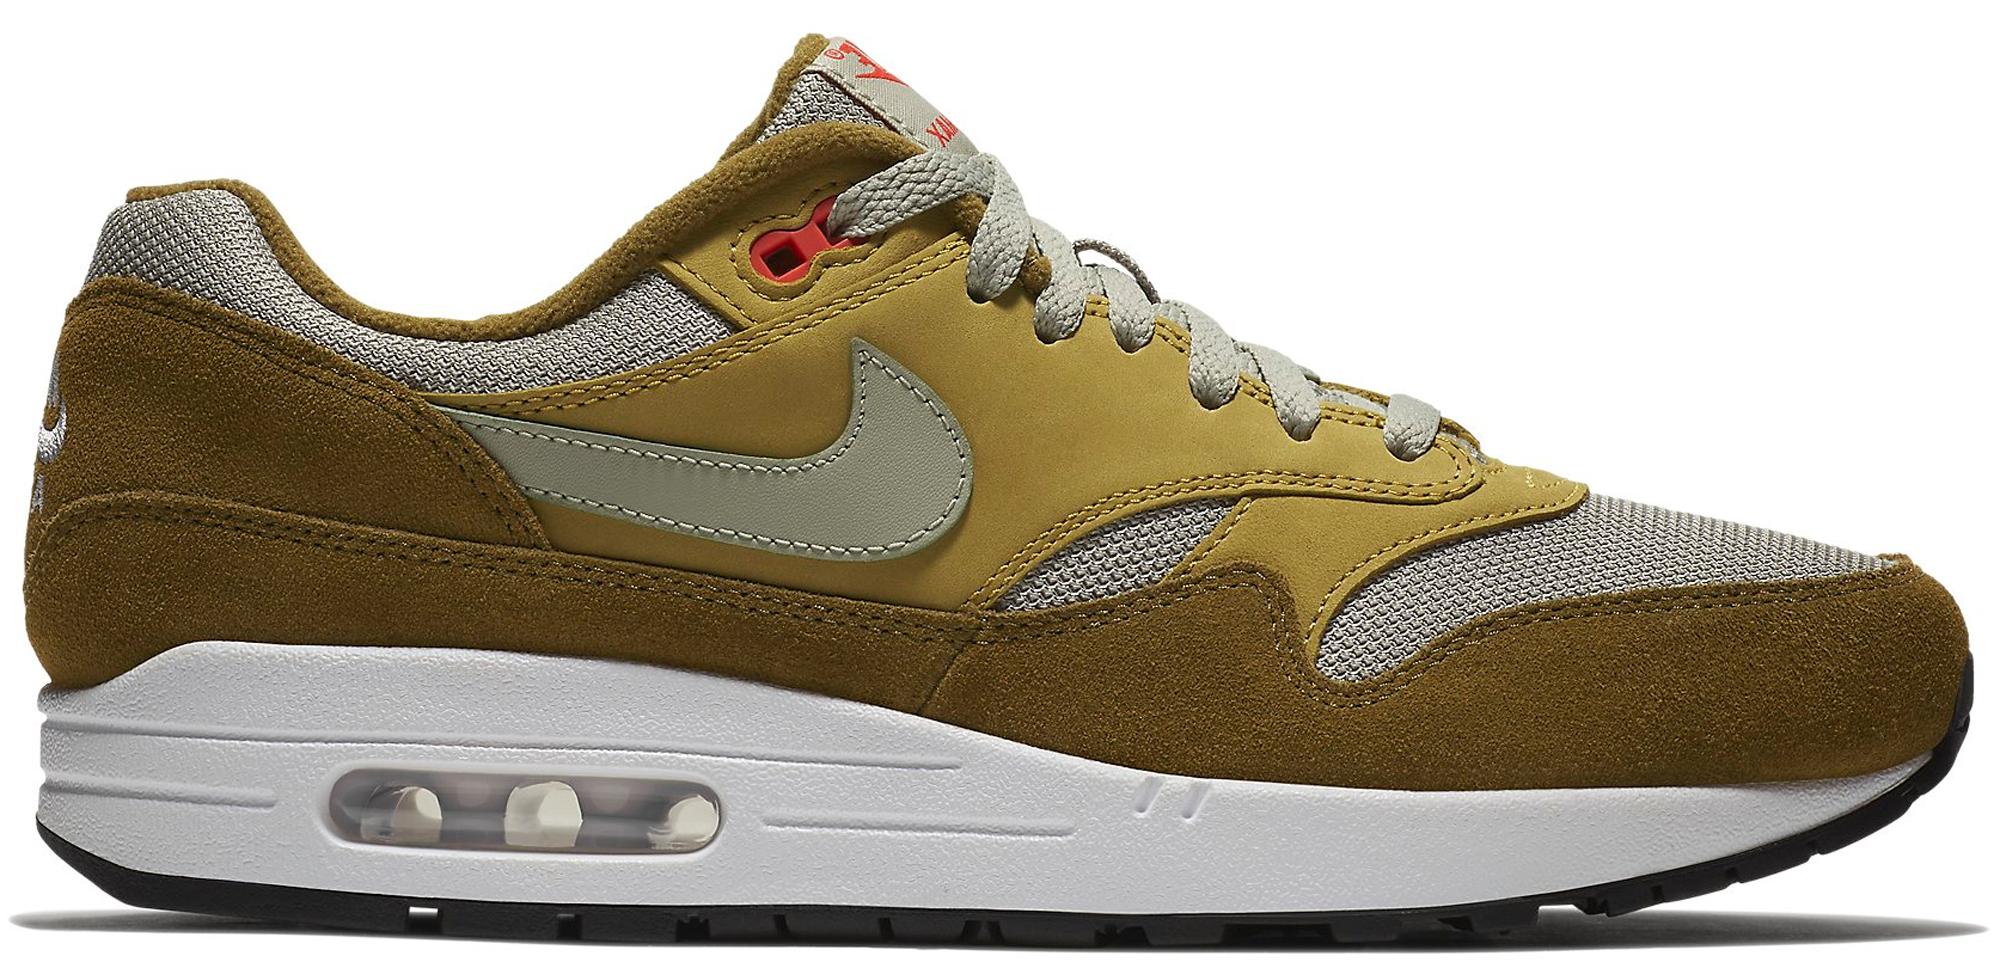 Atmos Nike Air Max 1 Curry Olive